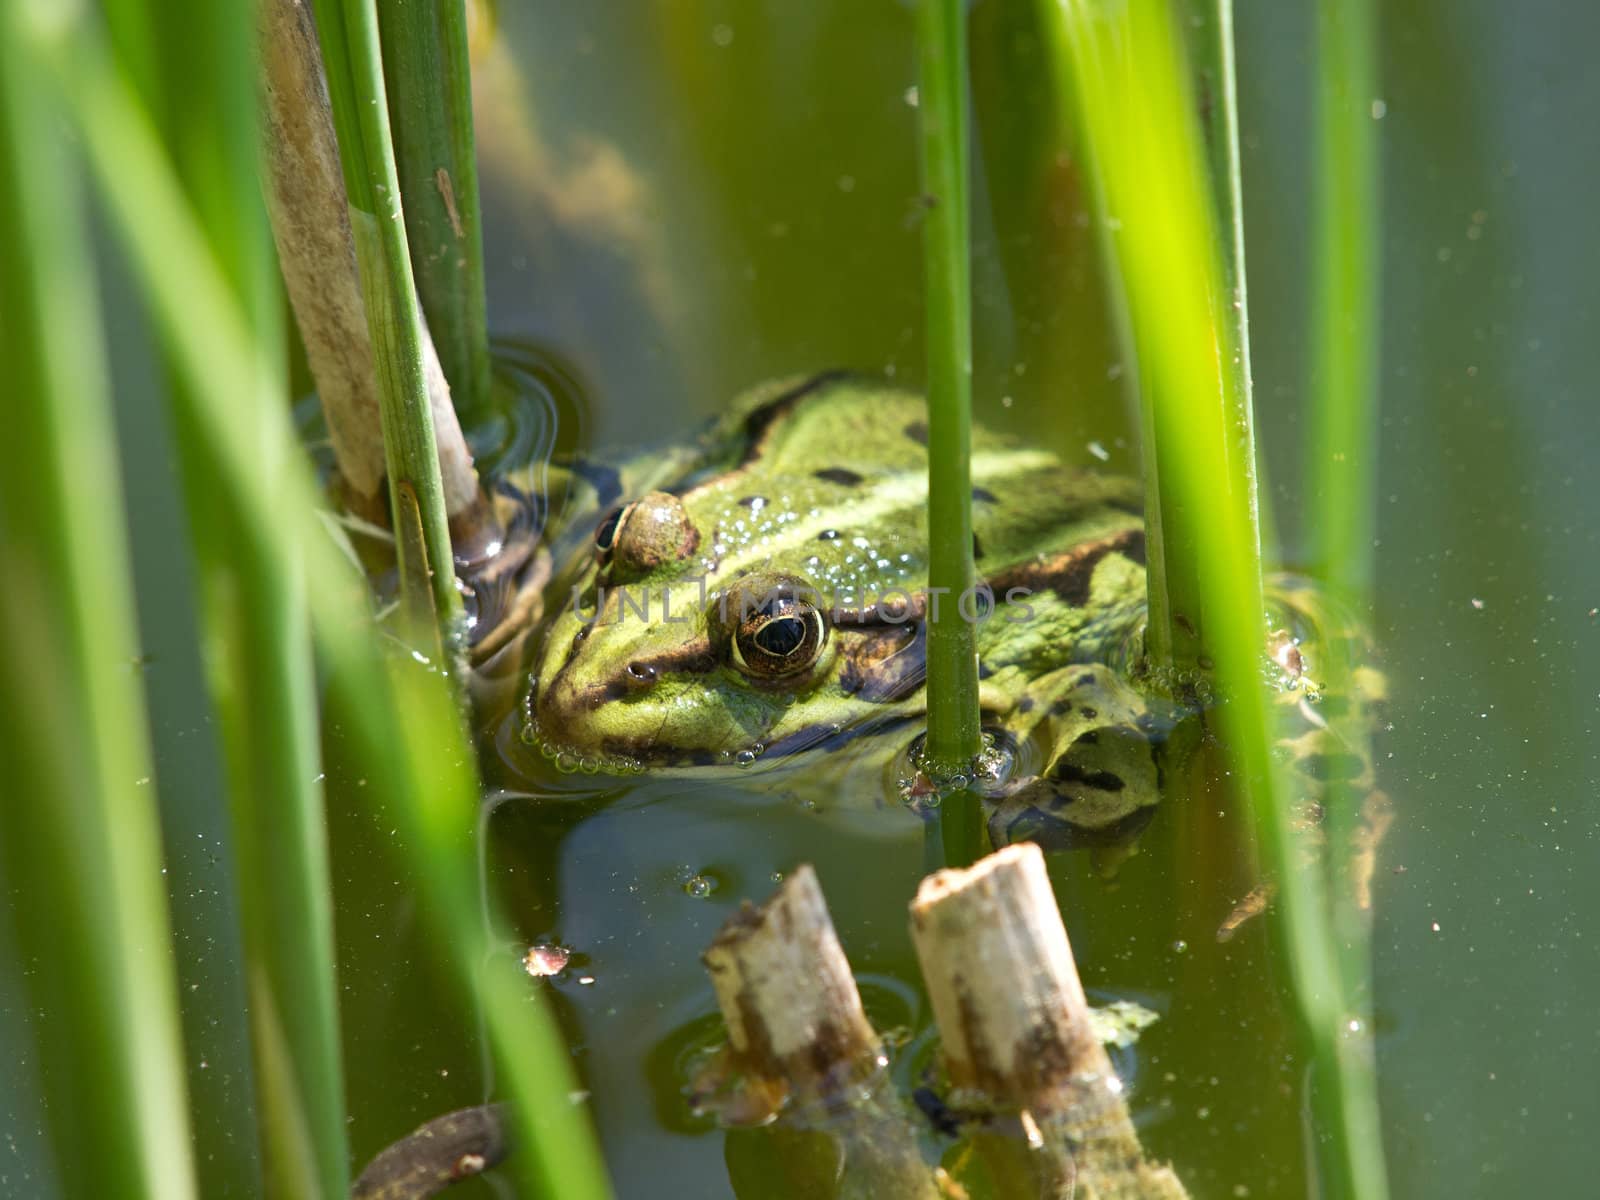 green frog in the lake with reed plants